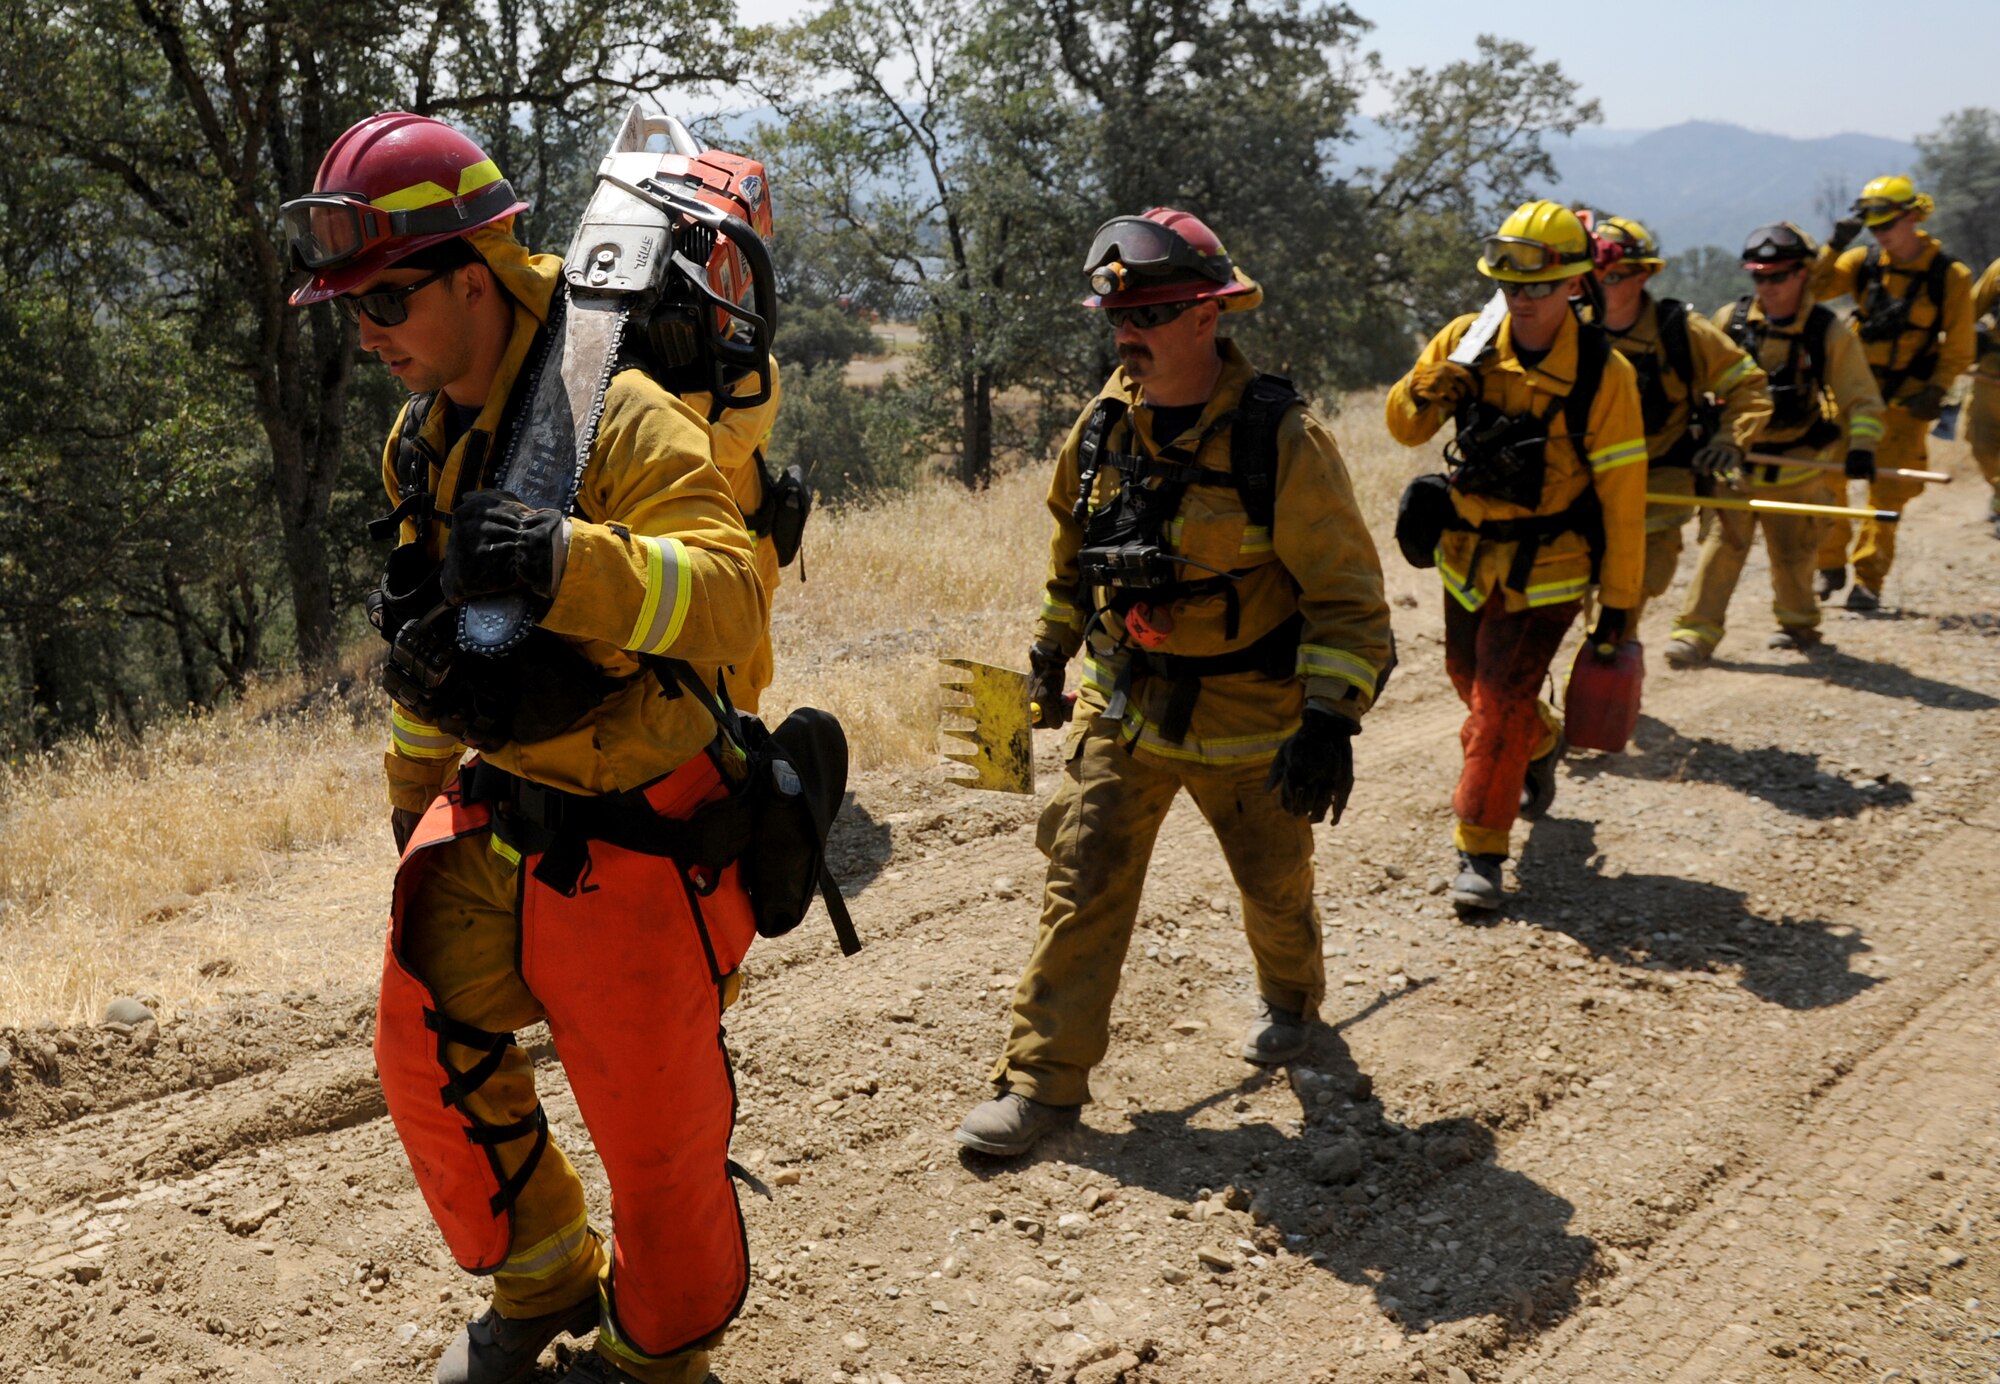 Steven Dobbs (left), 9th Civil Engineer Squadron fire captain, carries a chainsaw up a hill in front of other fire prevention organizations, Aug. 6, 2015, near Clearlake, California. The firefighters were sent to clear brush away from burned sections of land to prevent embers from igniting unburned areas. (U.S. Air Force Photo by Airman Preston L. Cherry)